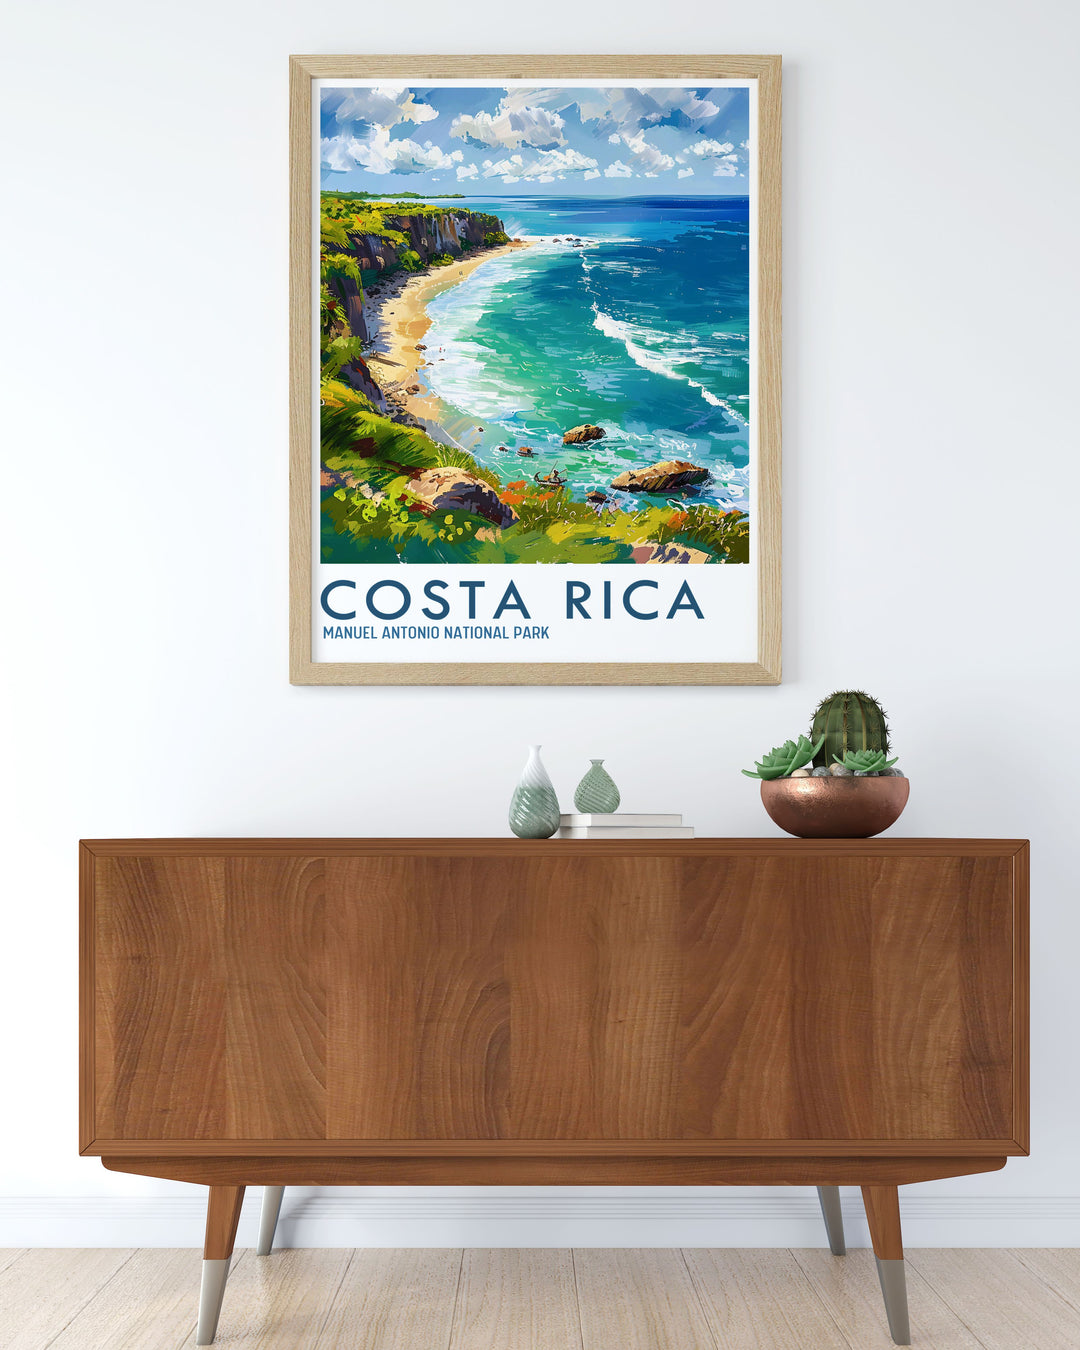 Experience the magic of Manuel Antonio National Park with this beautiful art print. Highlighting the parks rich wildlife and scenic views, this poster is ideal for those who love exploring tropical destinations. Add a piece of Costa Rican paradise to your walls with this captivating artwork.